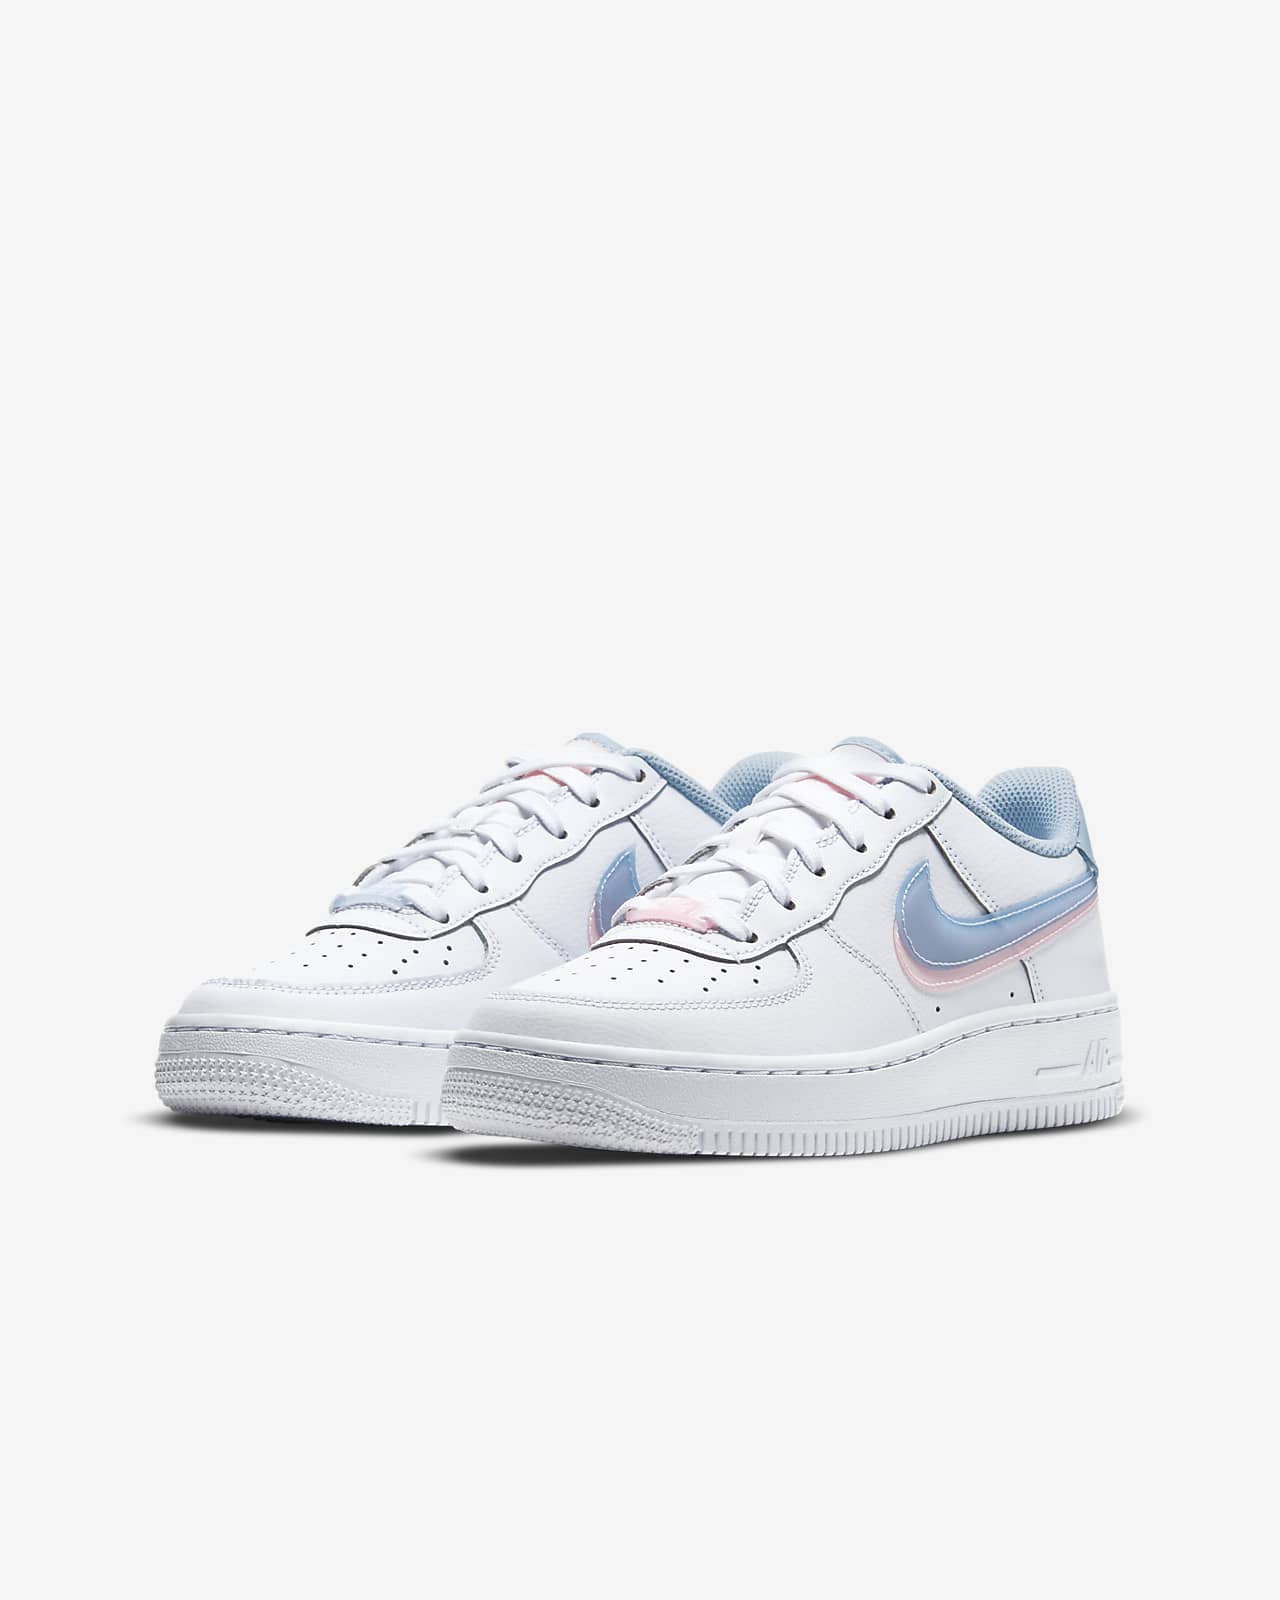 nike airforces blue